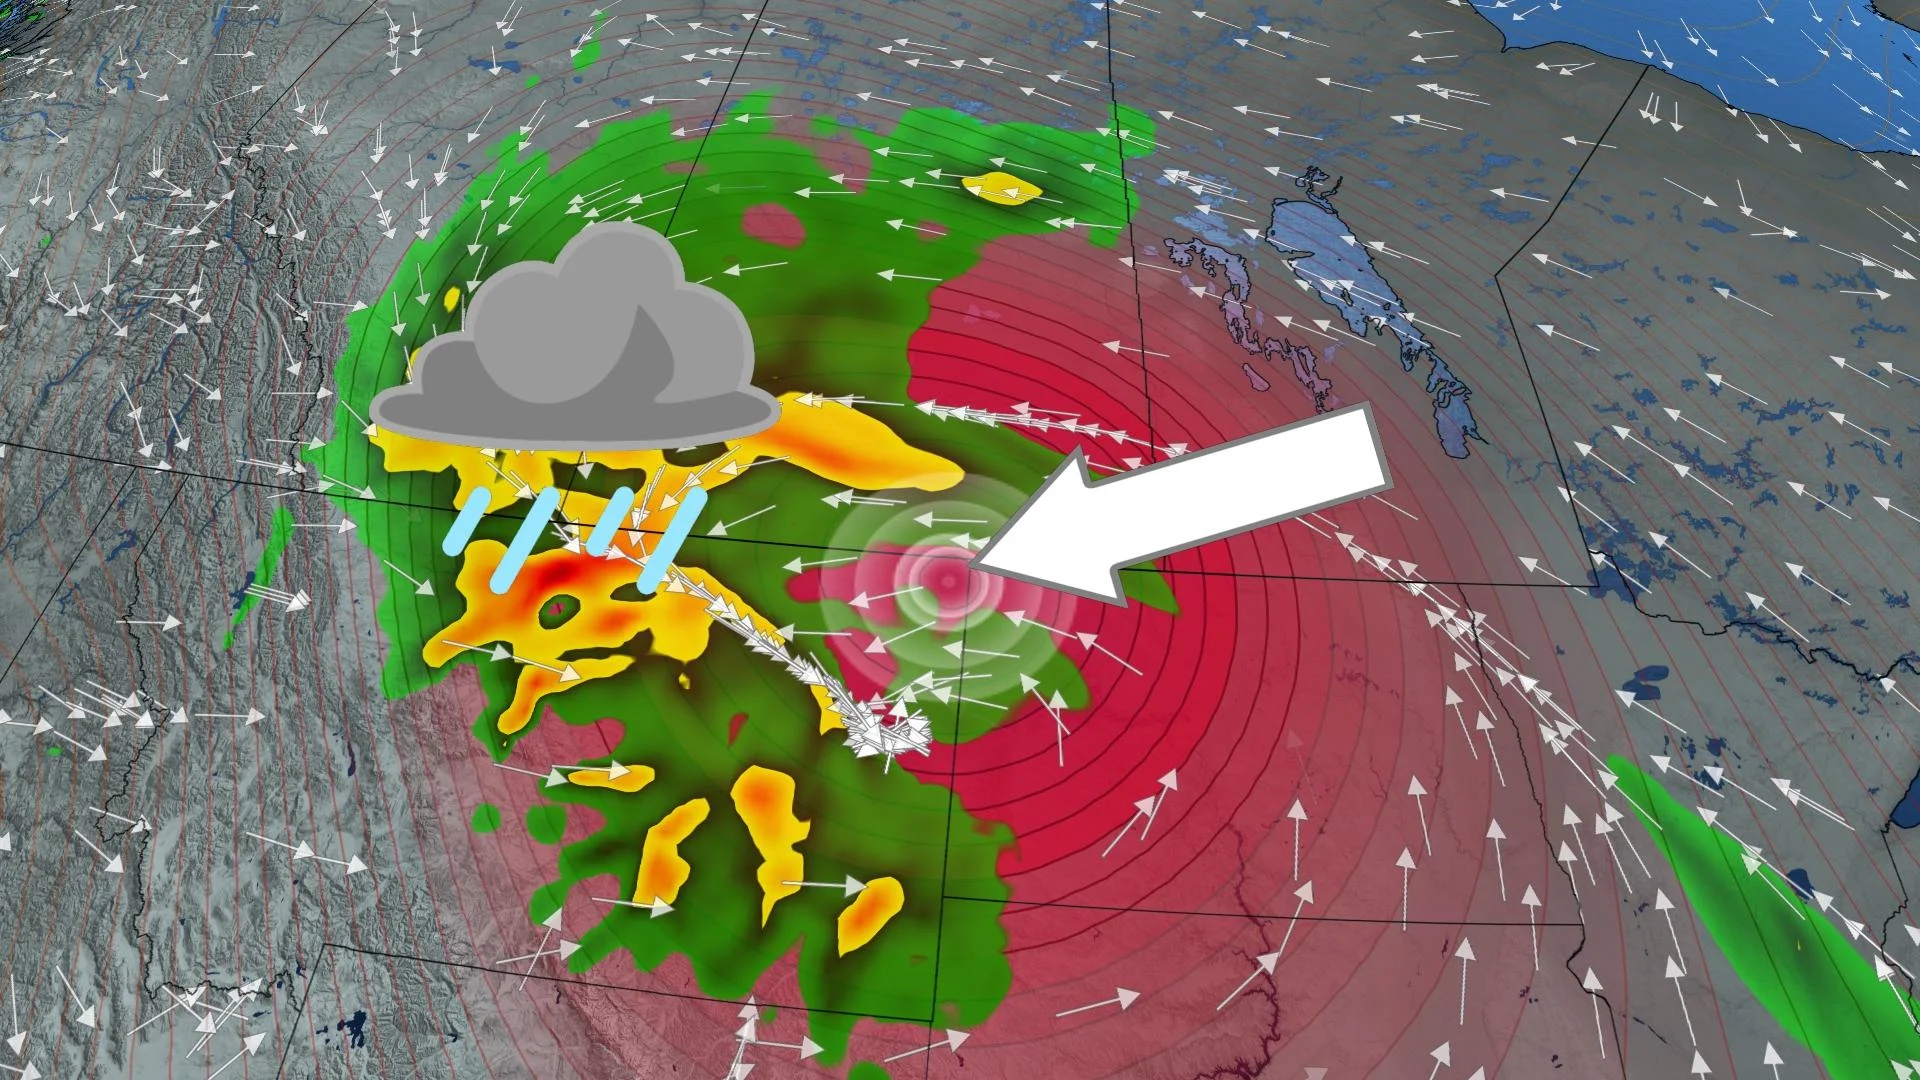 An unusually strong storm for this time of year will bring days of drenching rains to parts of Alberta this week. Timing, details here